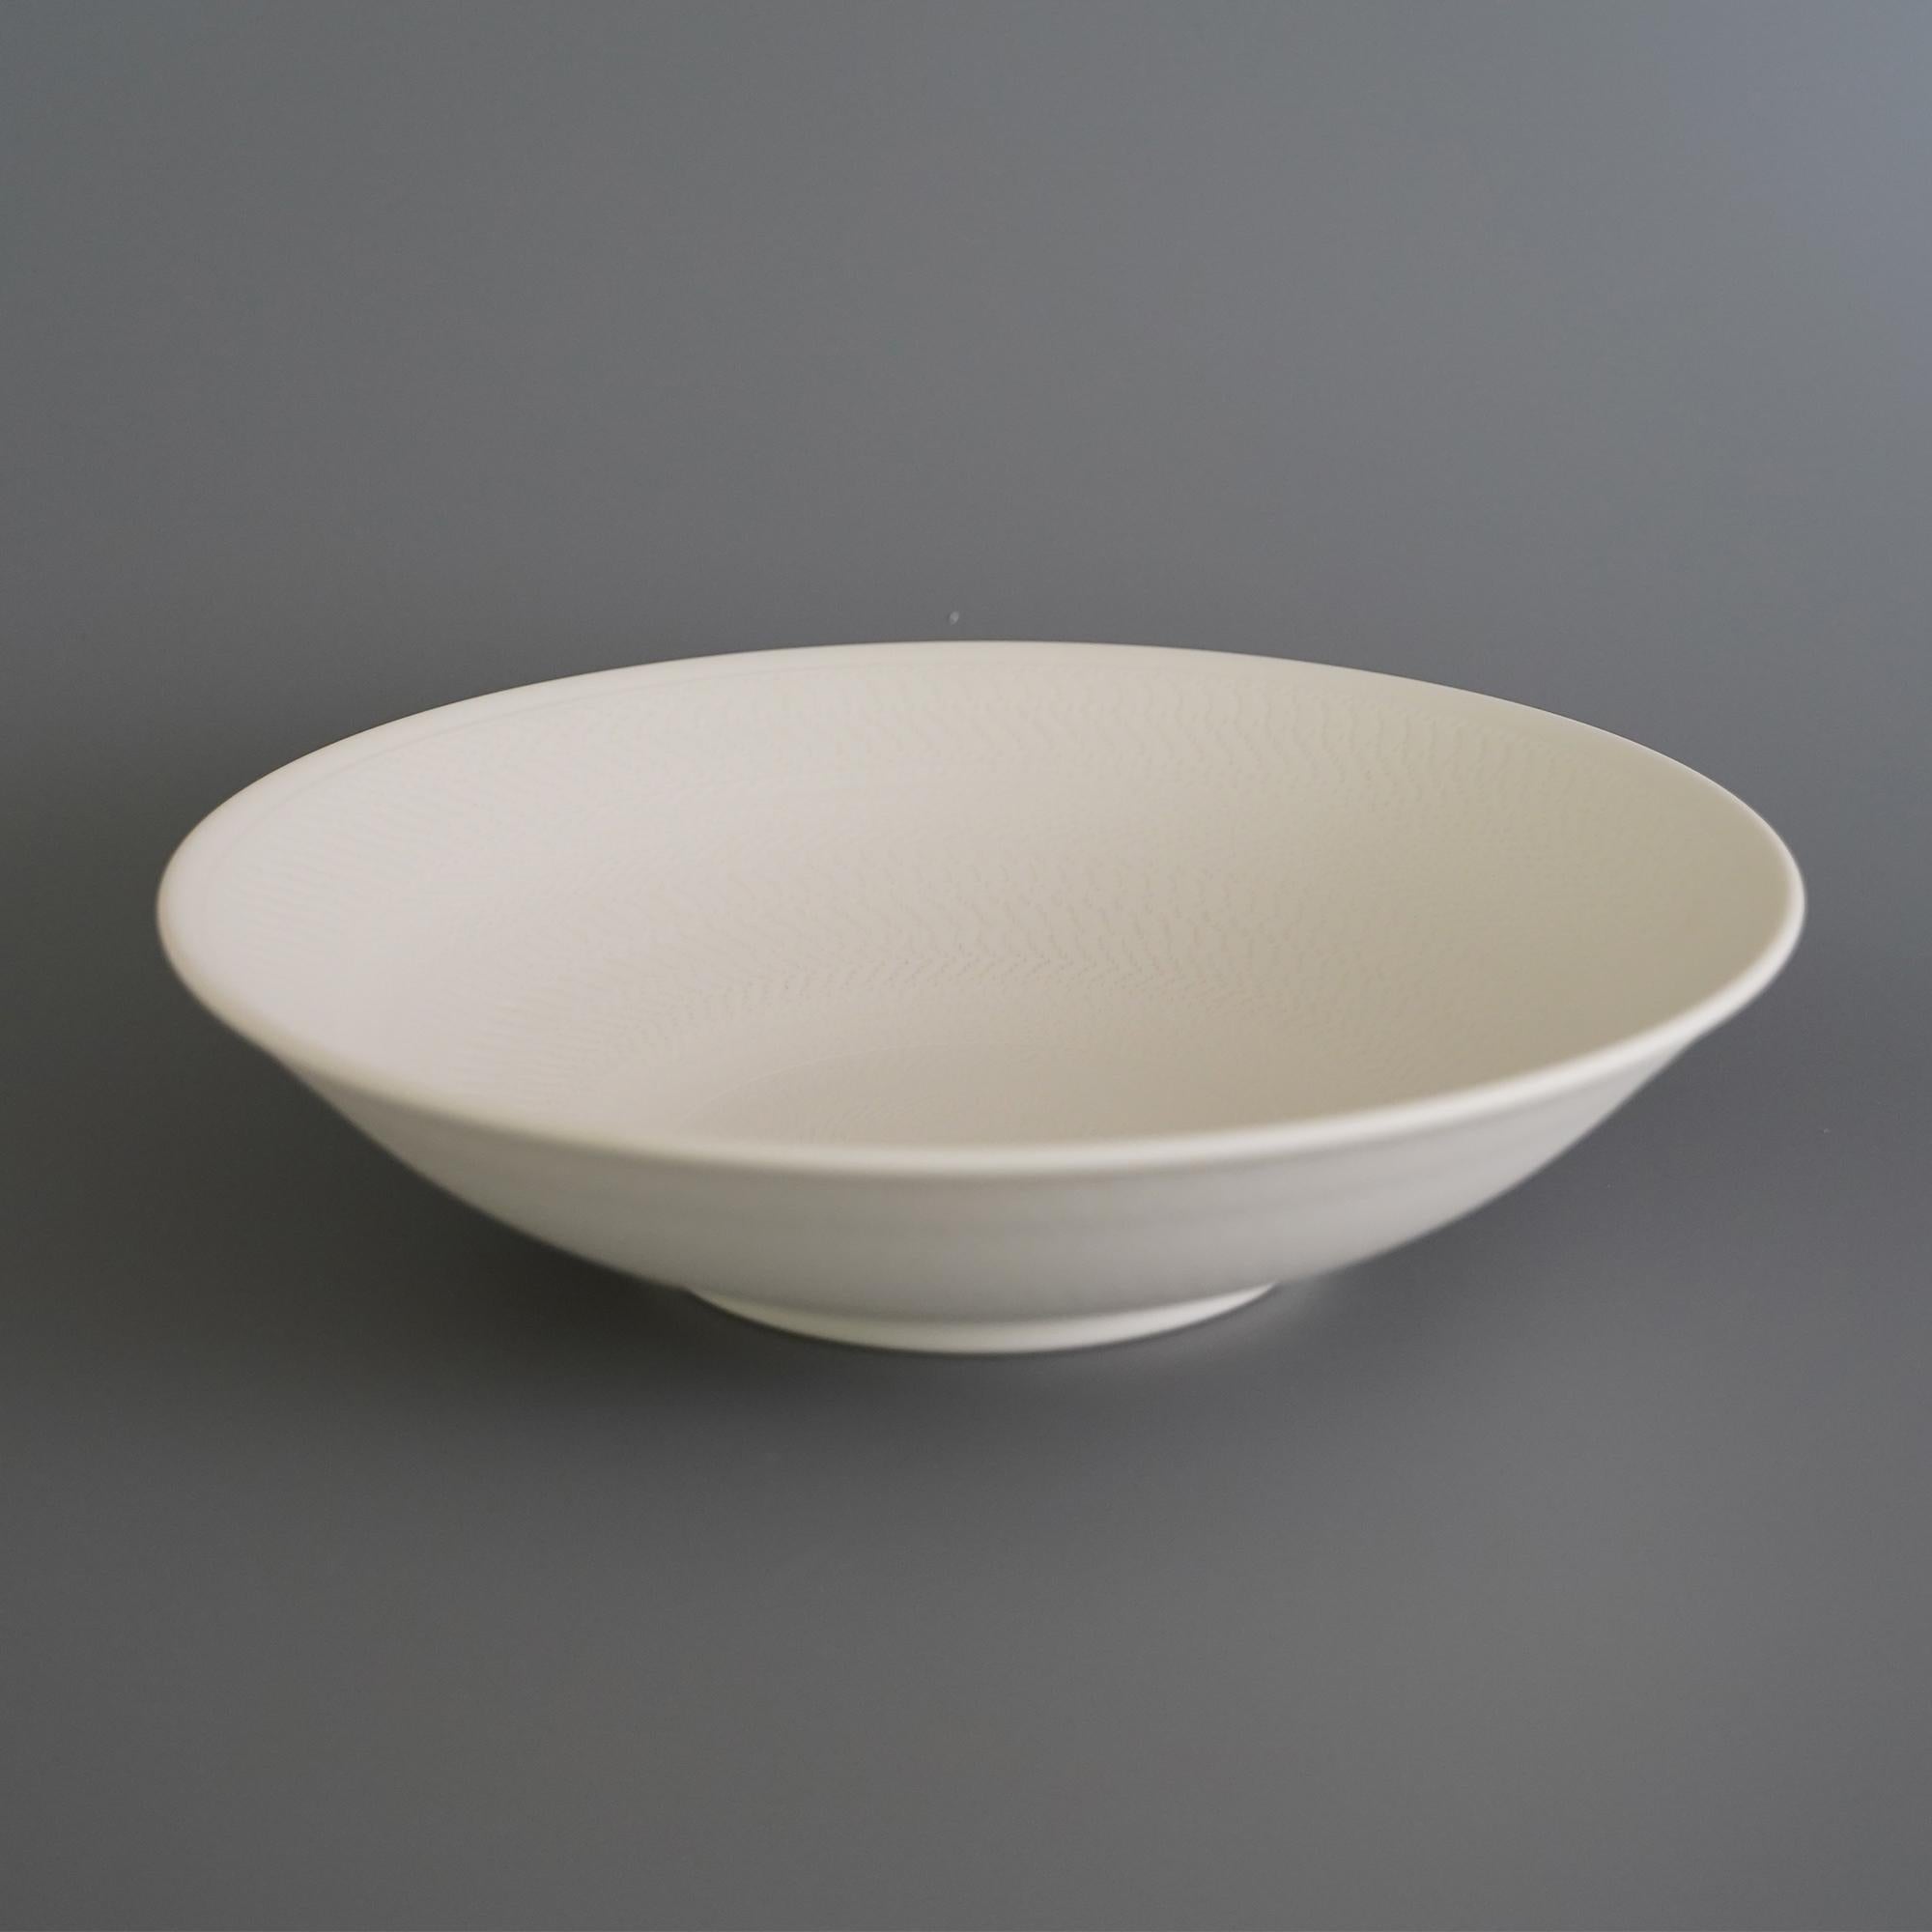 Set of 4 Helice fruit bowl by Studio Cúze
Dimensions: W 27 x H 6.5 cm
Materials: ceramic

The Helice fruit bowl is an all-white bowl with a special quality and a unique handmade pattern. The bowl offers an even and precise shape, which is